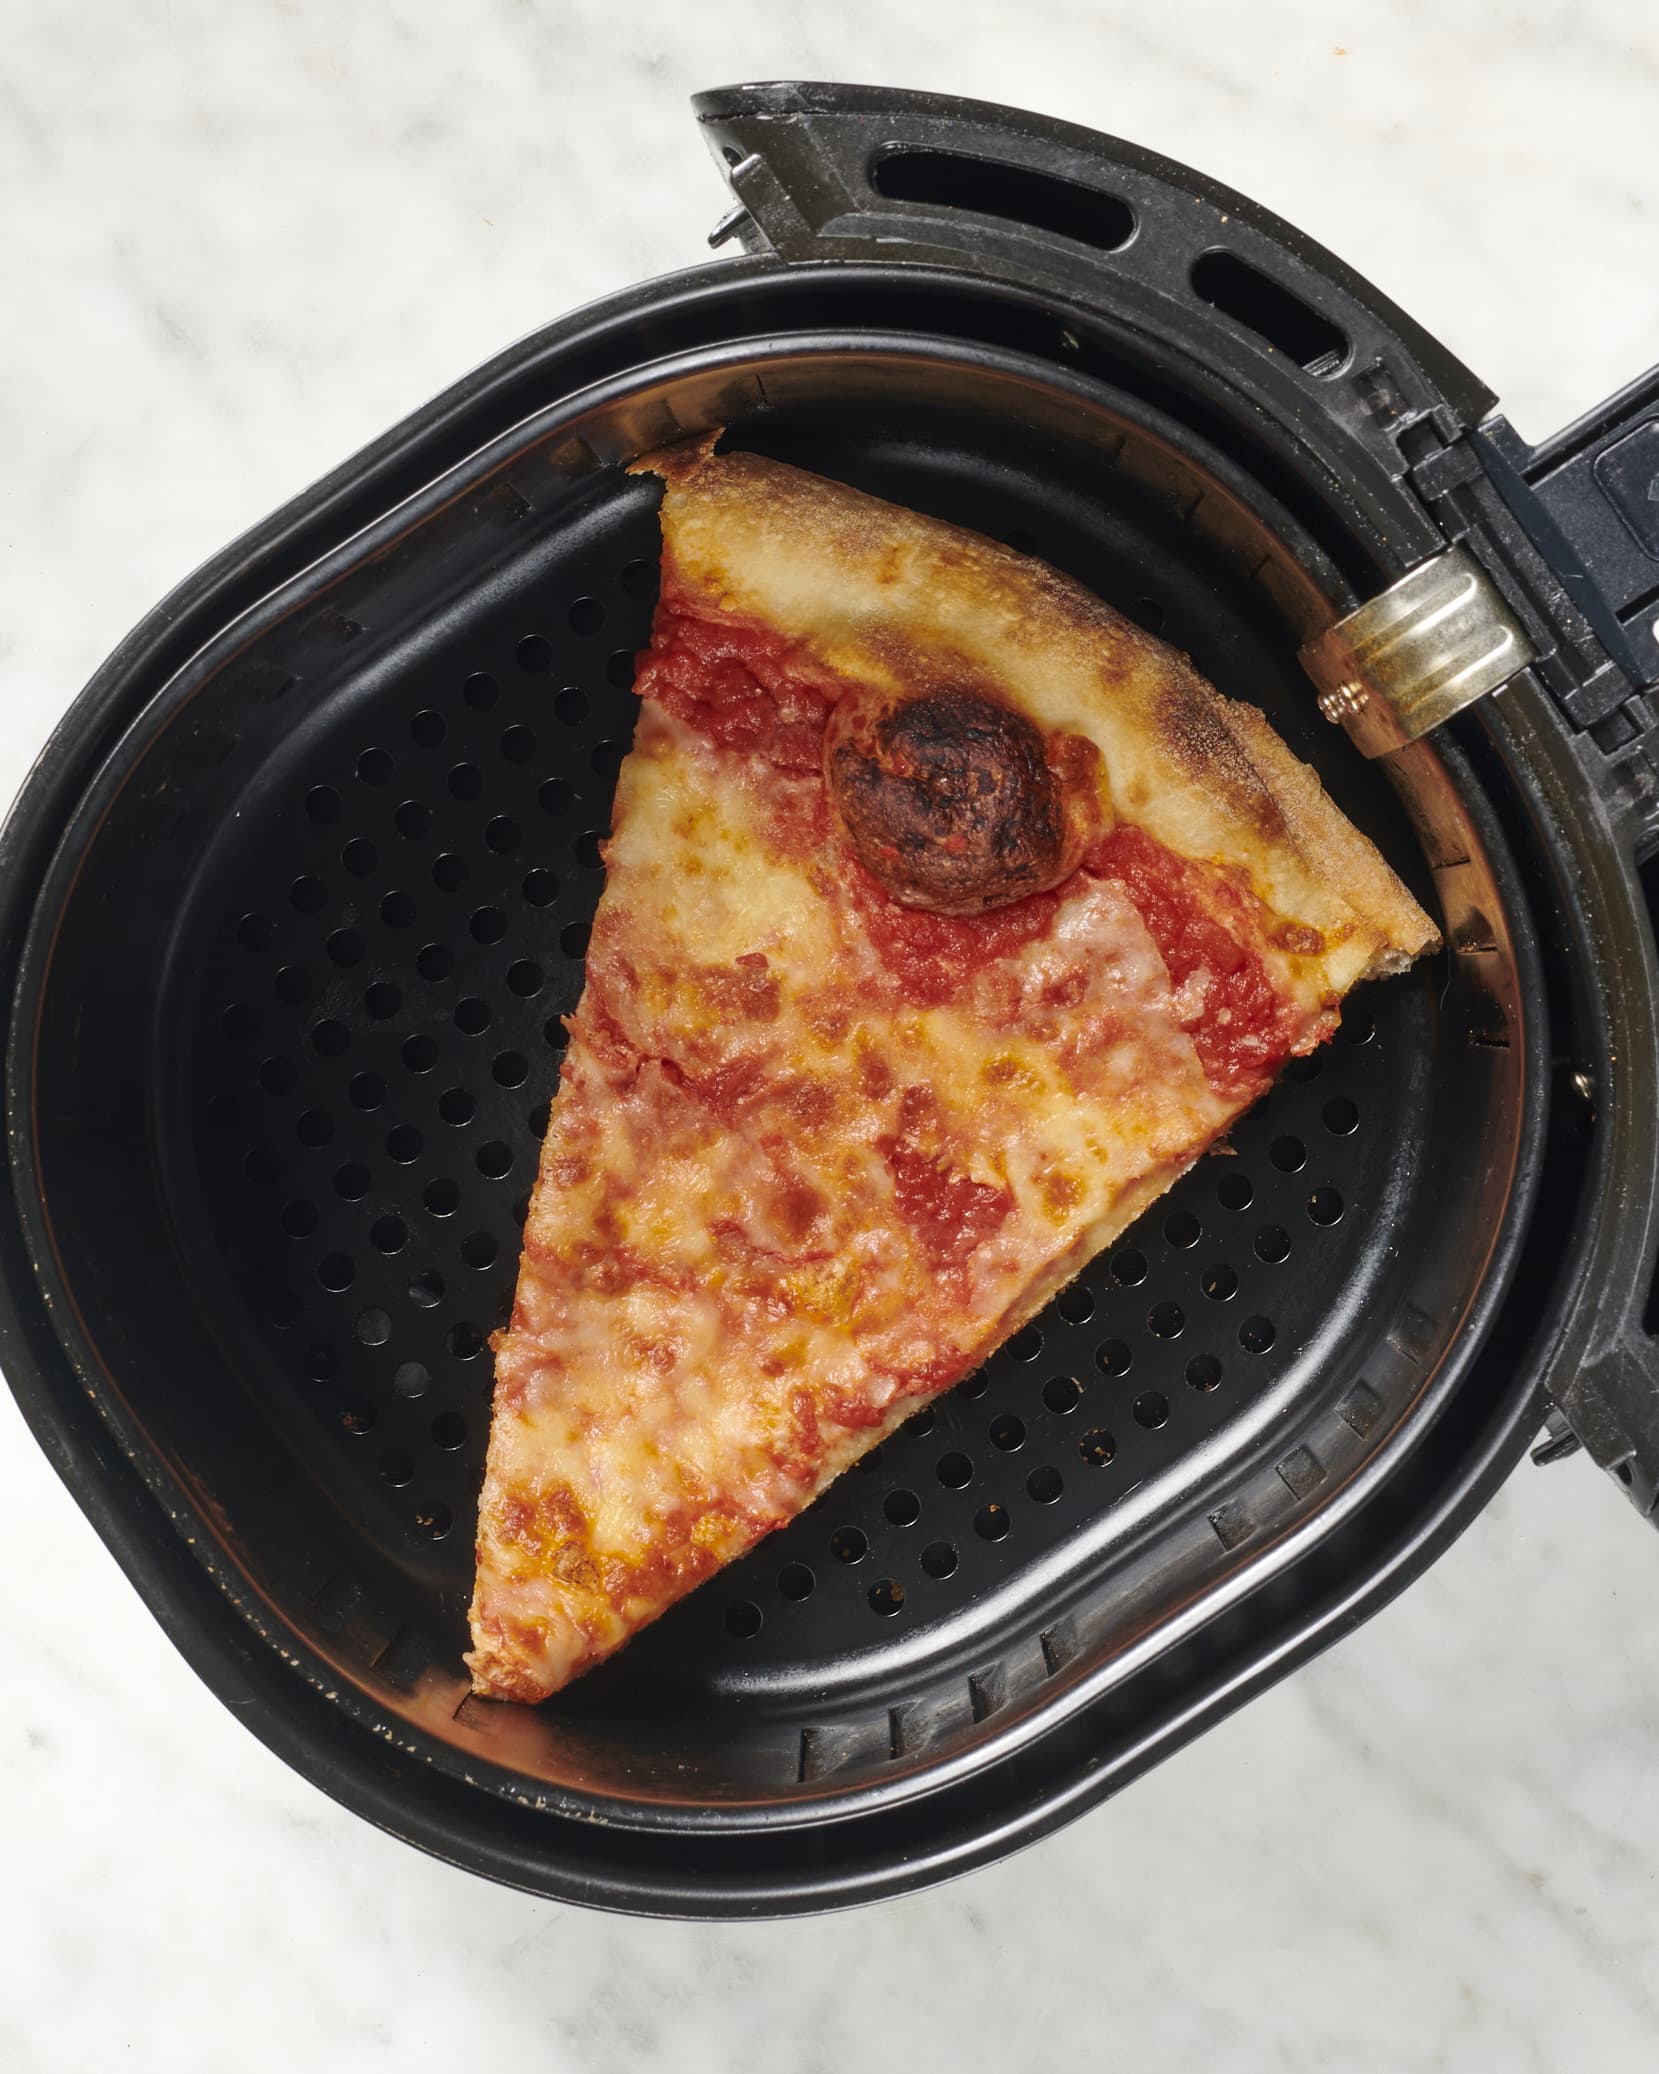 https://cdn.apartmenttherapy.info/image/upload/v1694807900/k/Photo/Series/2023-09-how-to-reheat-pizza-in-an-airfryer/cropped/how-to-reheat-pizza-in-an-air-fryer-067-01.jpg